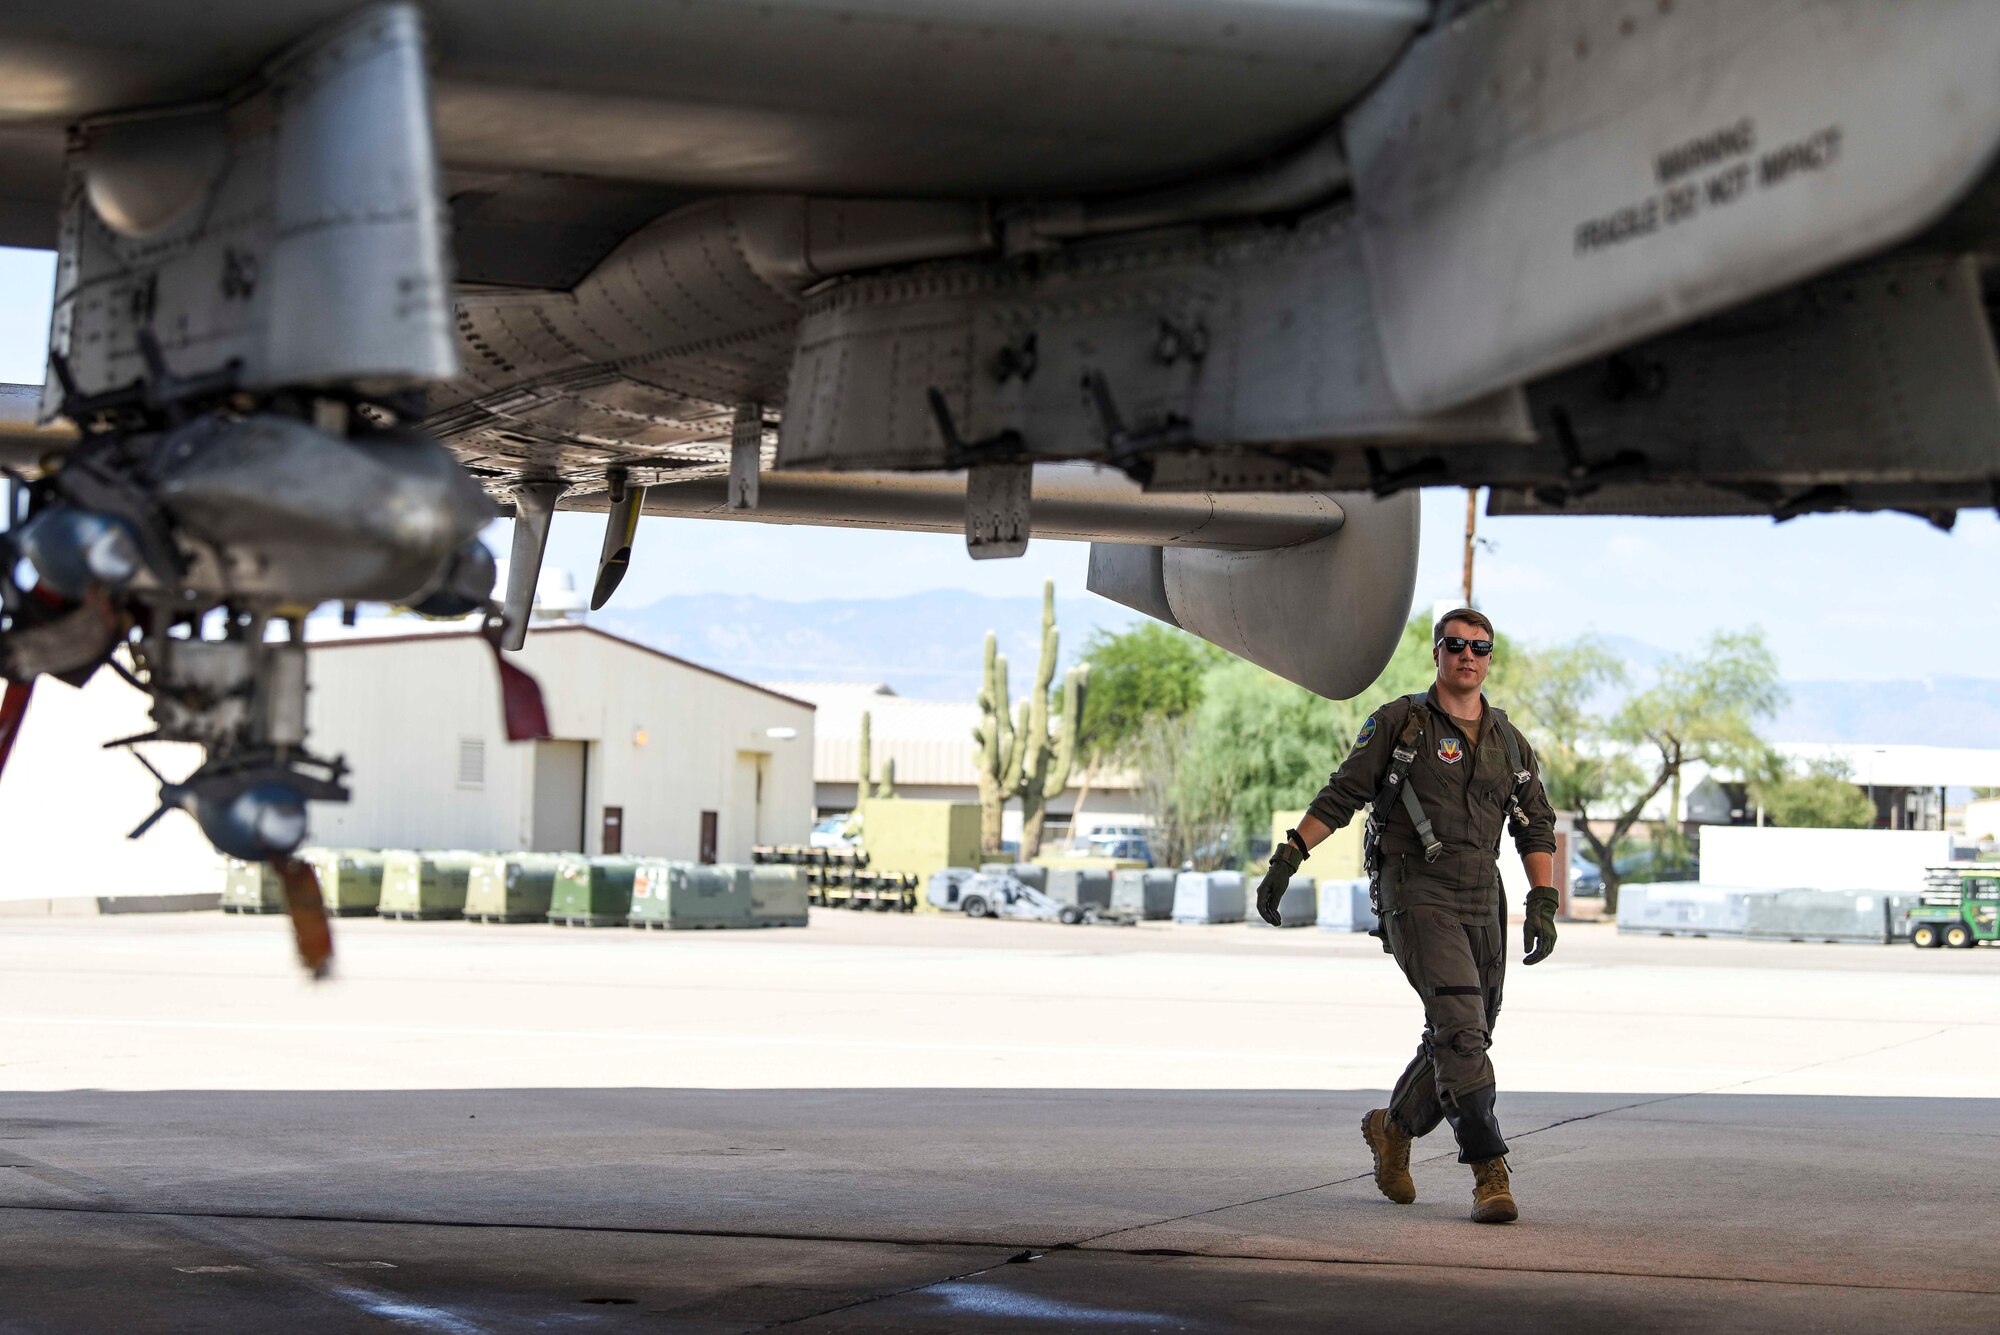 At Davis-Monthan Air Force Base in Tucson, Arizona, an Air Force Reserve unit exists for the purpose of training and producing A-10 Thunderbolt II pilots for the U.S. Air Force. The 47th Fighter Squadron is part of the 944th Fighter Wing whose mission is to “Forge and Fight” by training fighter pilots across the country, covering four separate fighter aircraft.